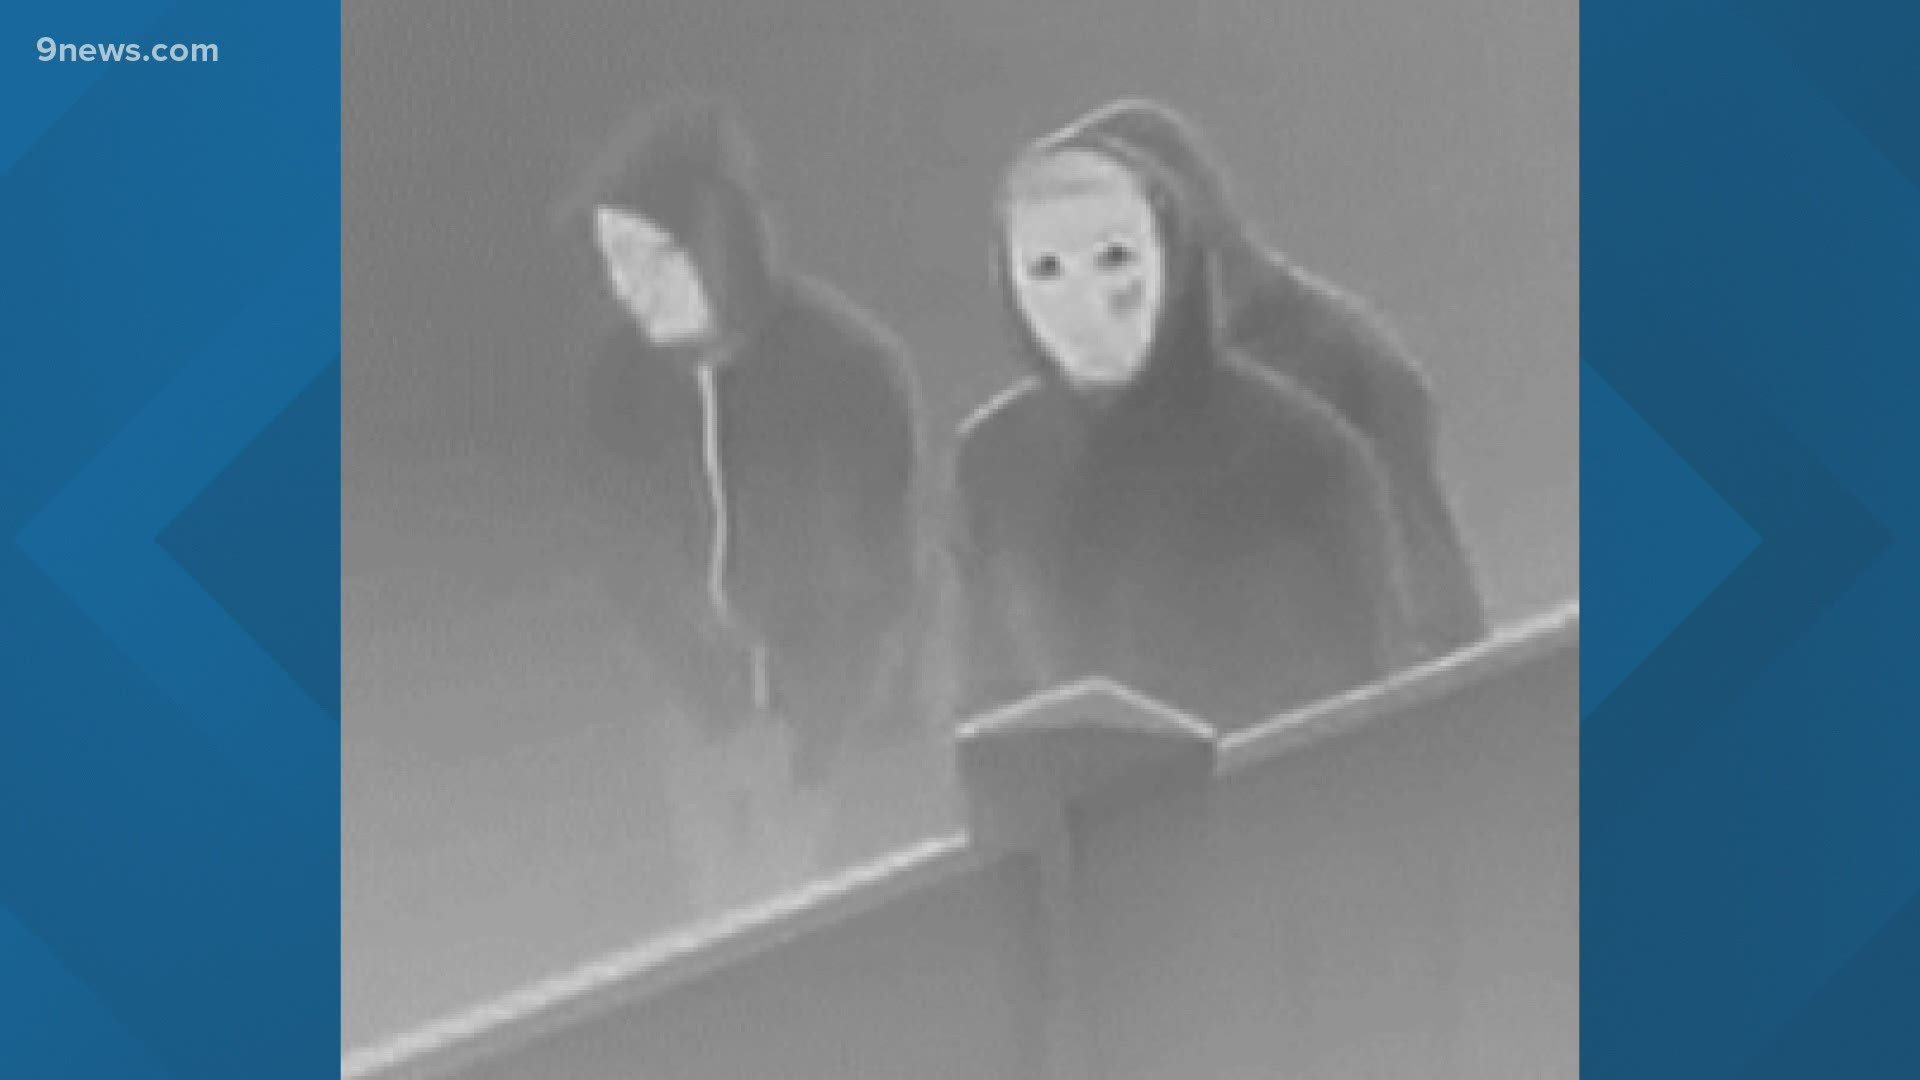 The three suspects were seen in a photo wearing dark hoodies and full-face masks. Police said they fled the area in a dark-colored four-door sedan.